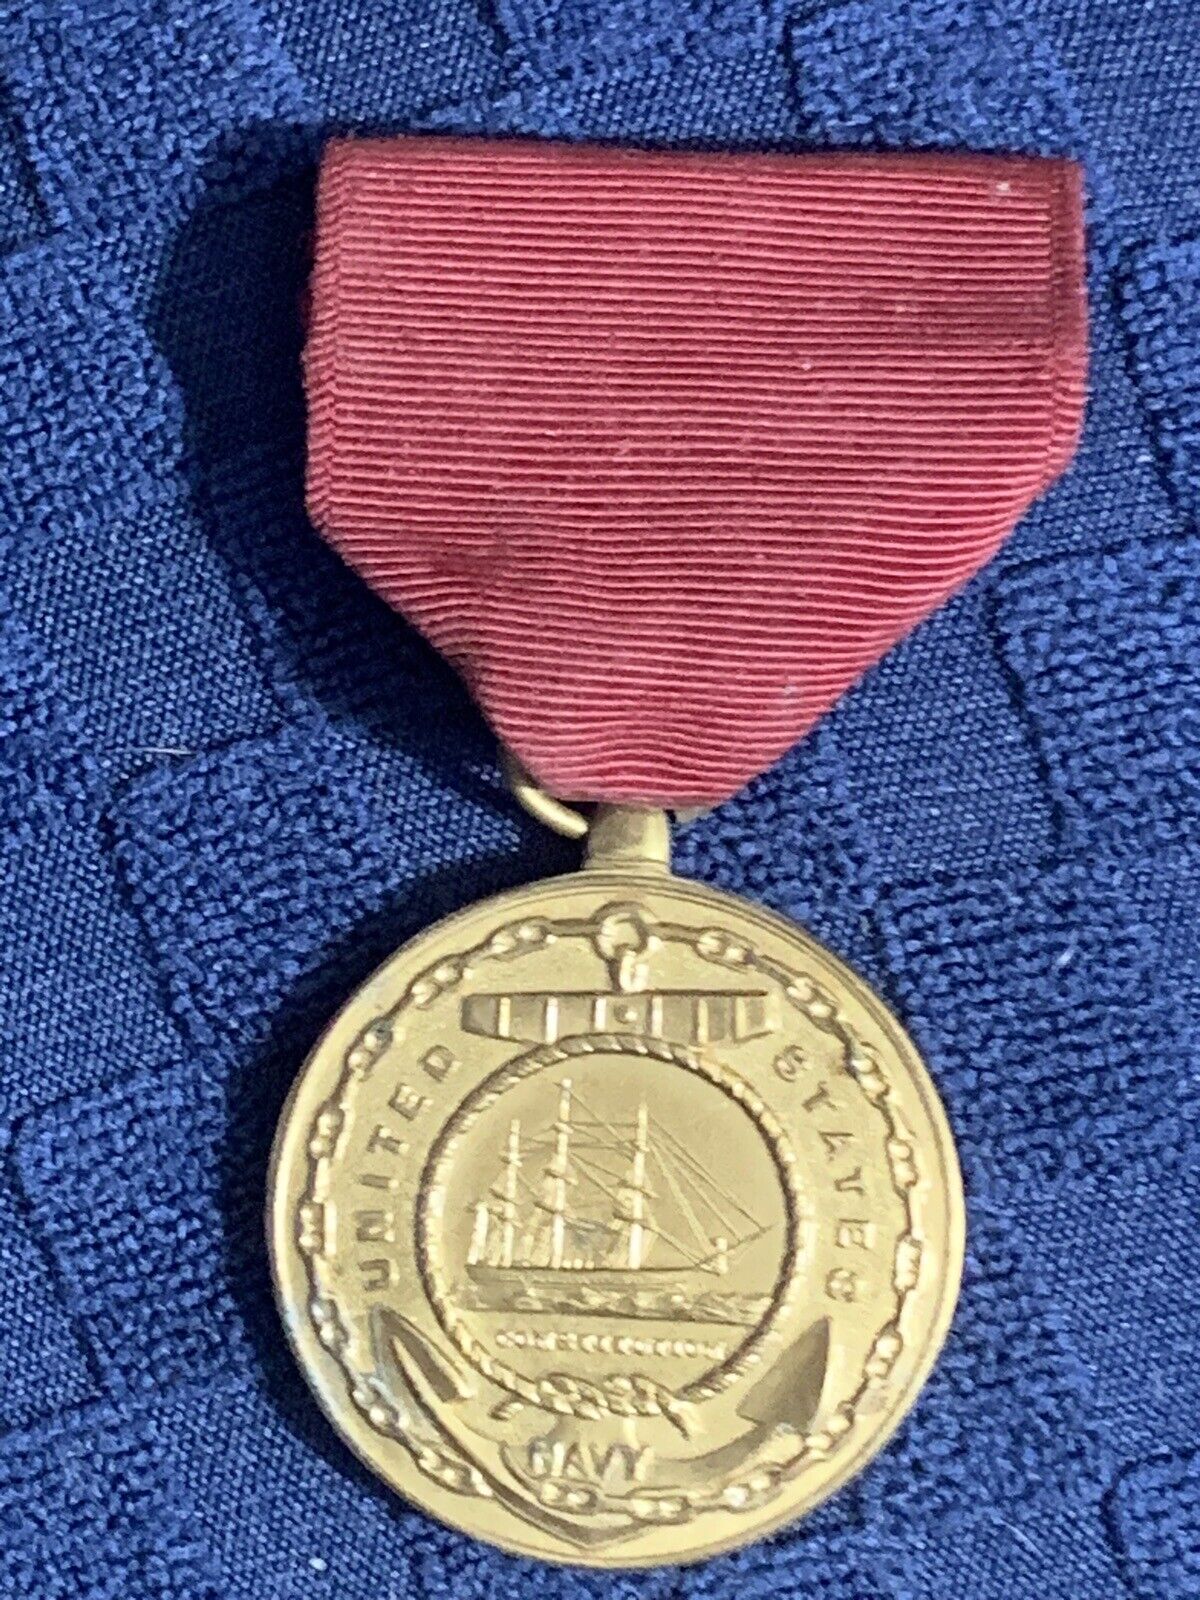 Authentic USN US Navy Good Conduct Medal Great Condition